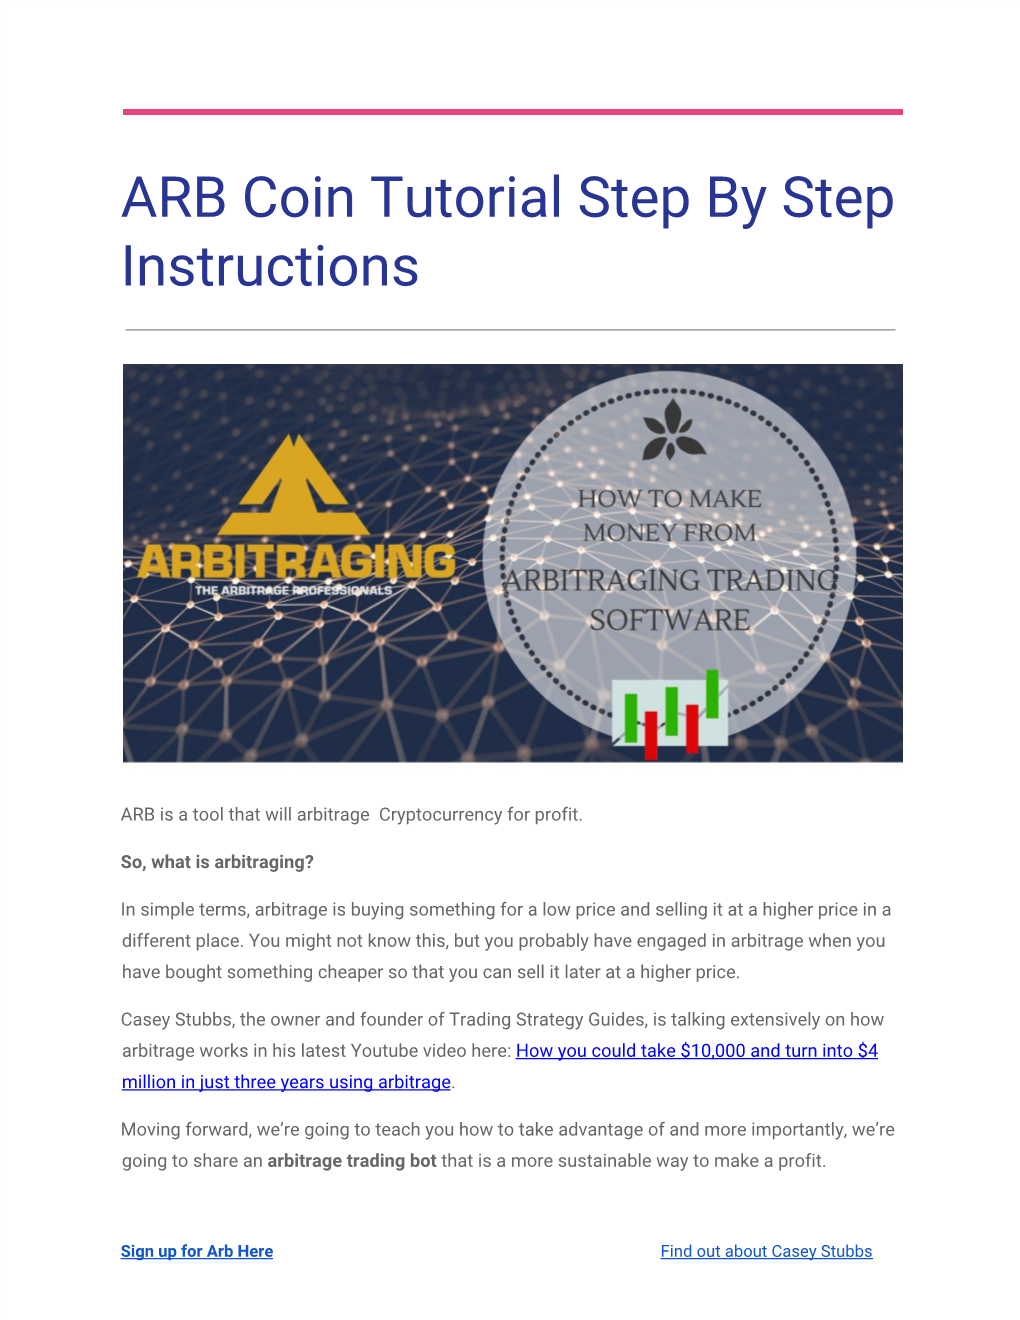 ARB Coin Tutorial Step by Step Instructions